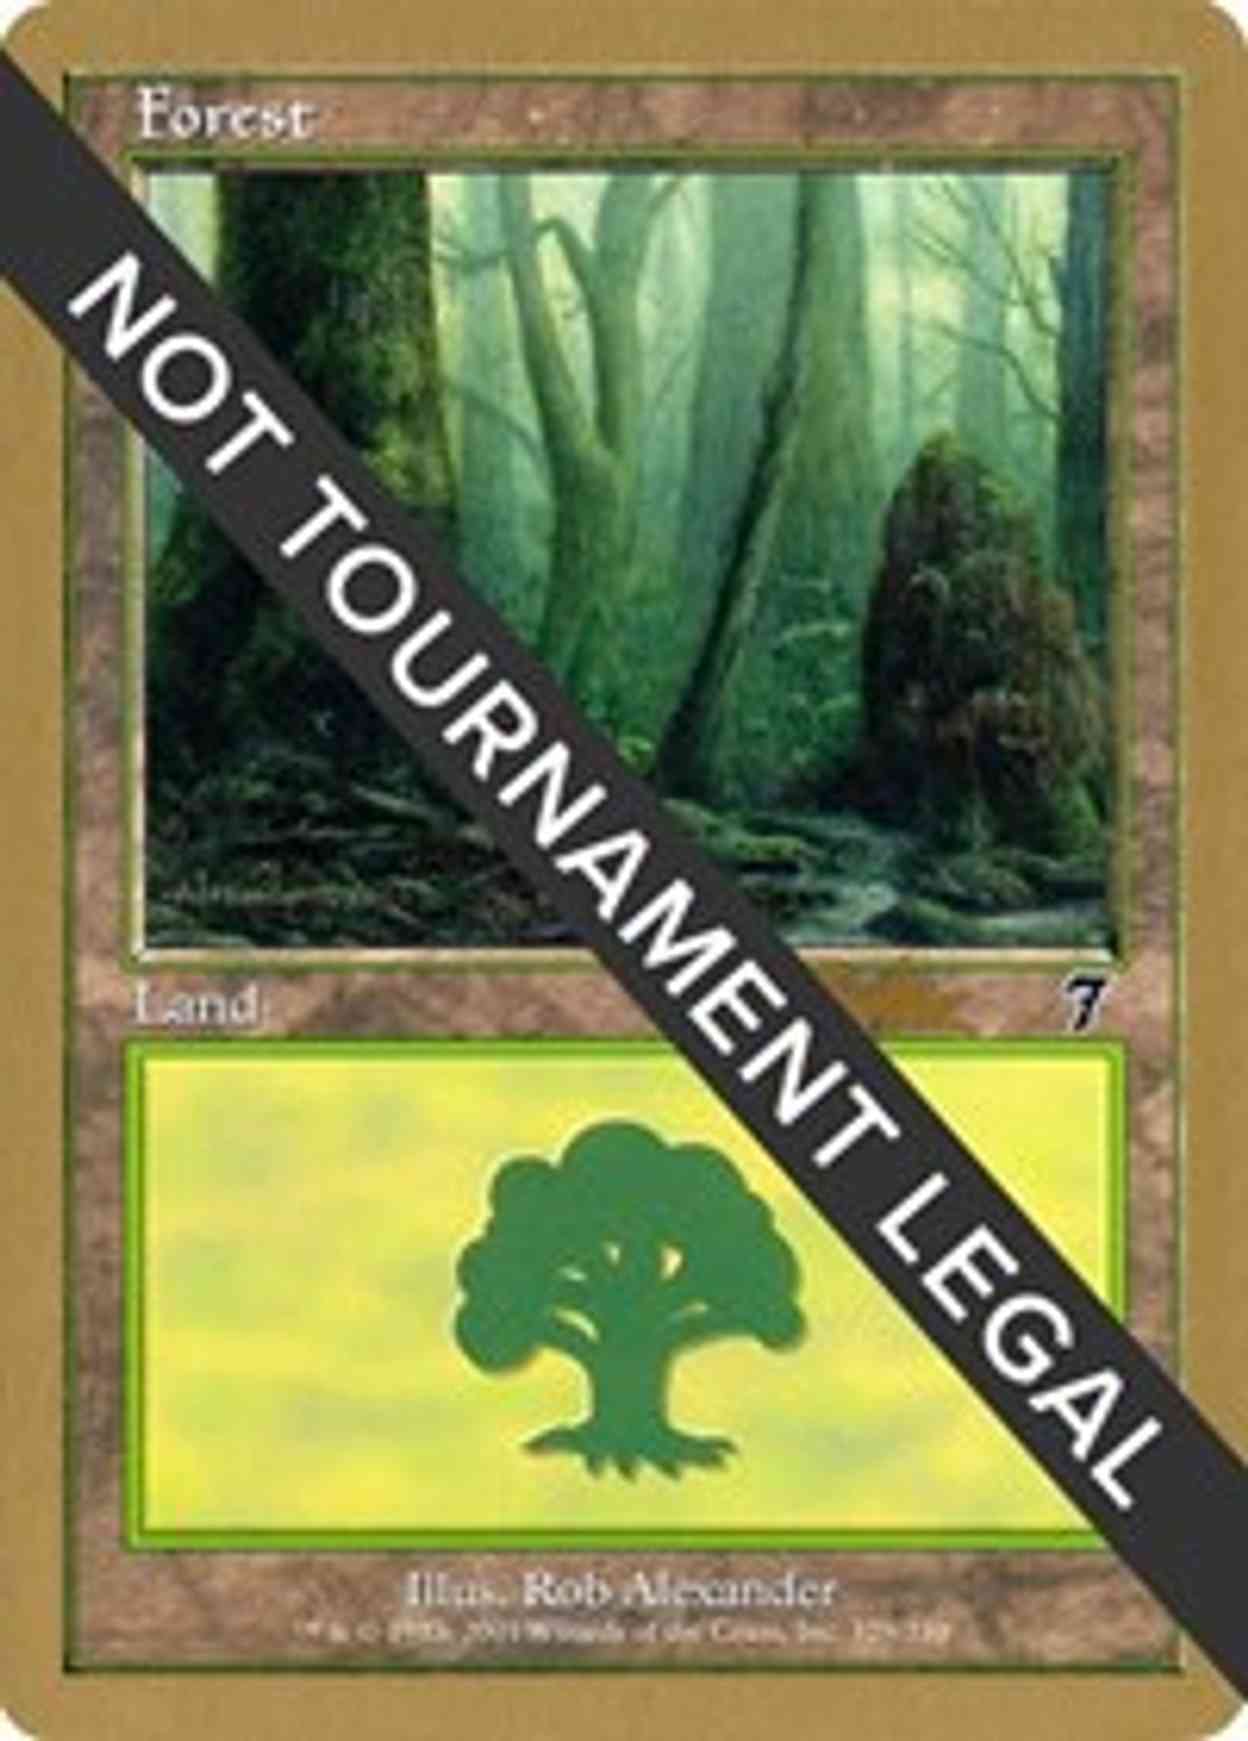 Forest (329) - 2002 Brian Kibler (7ED) magic card front